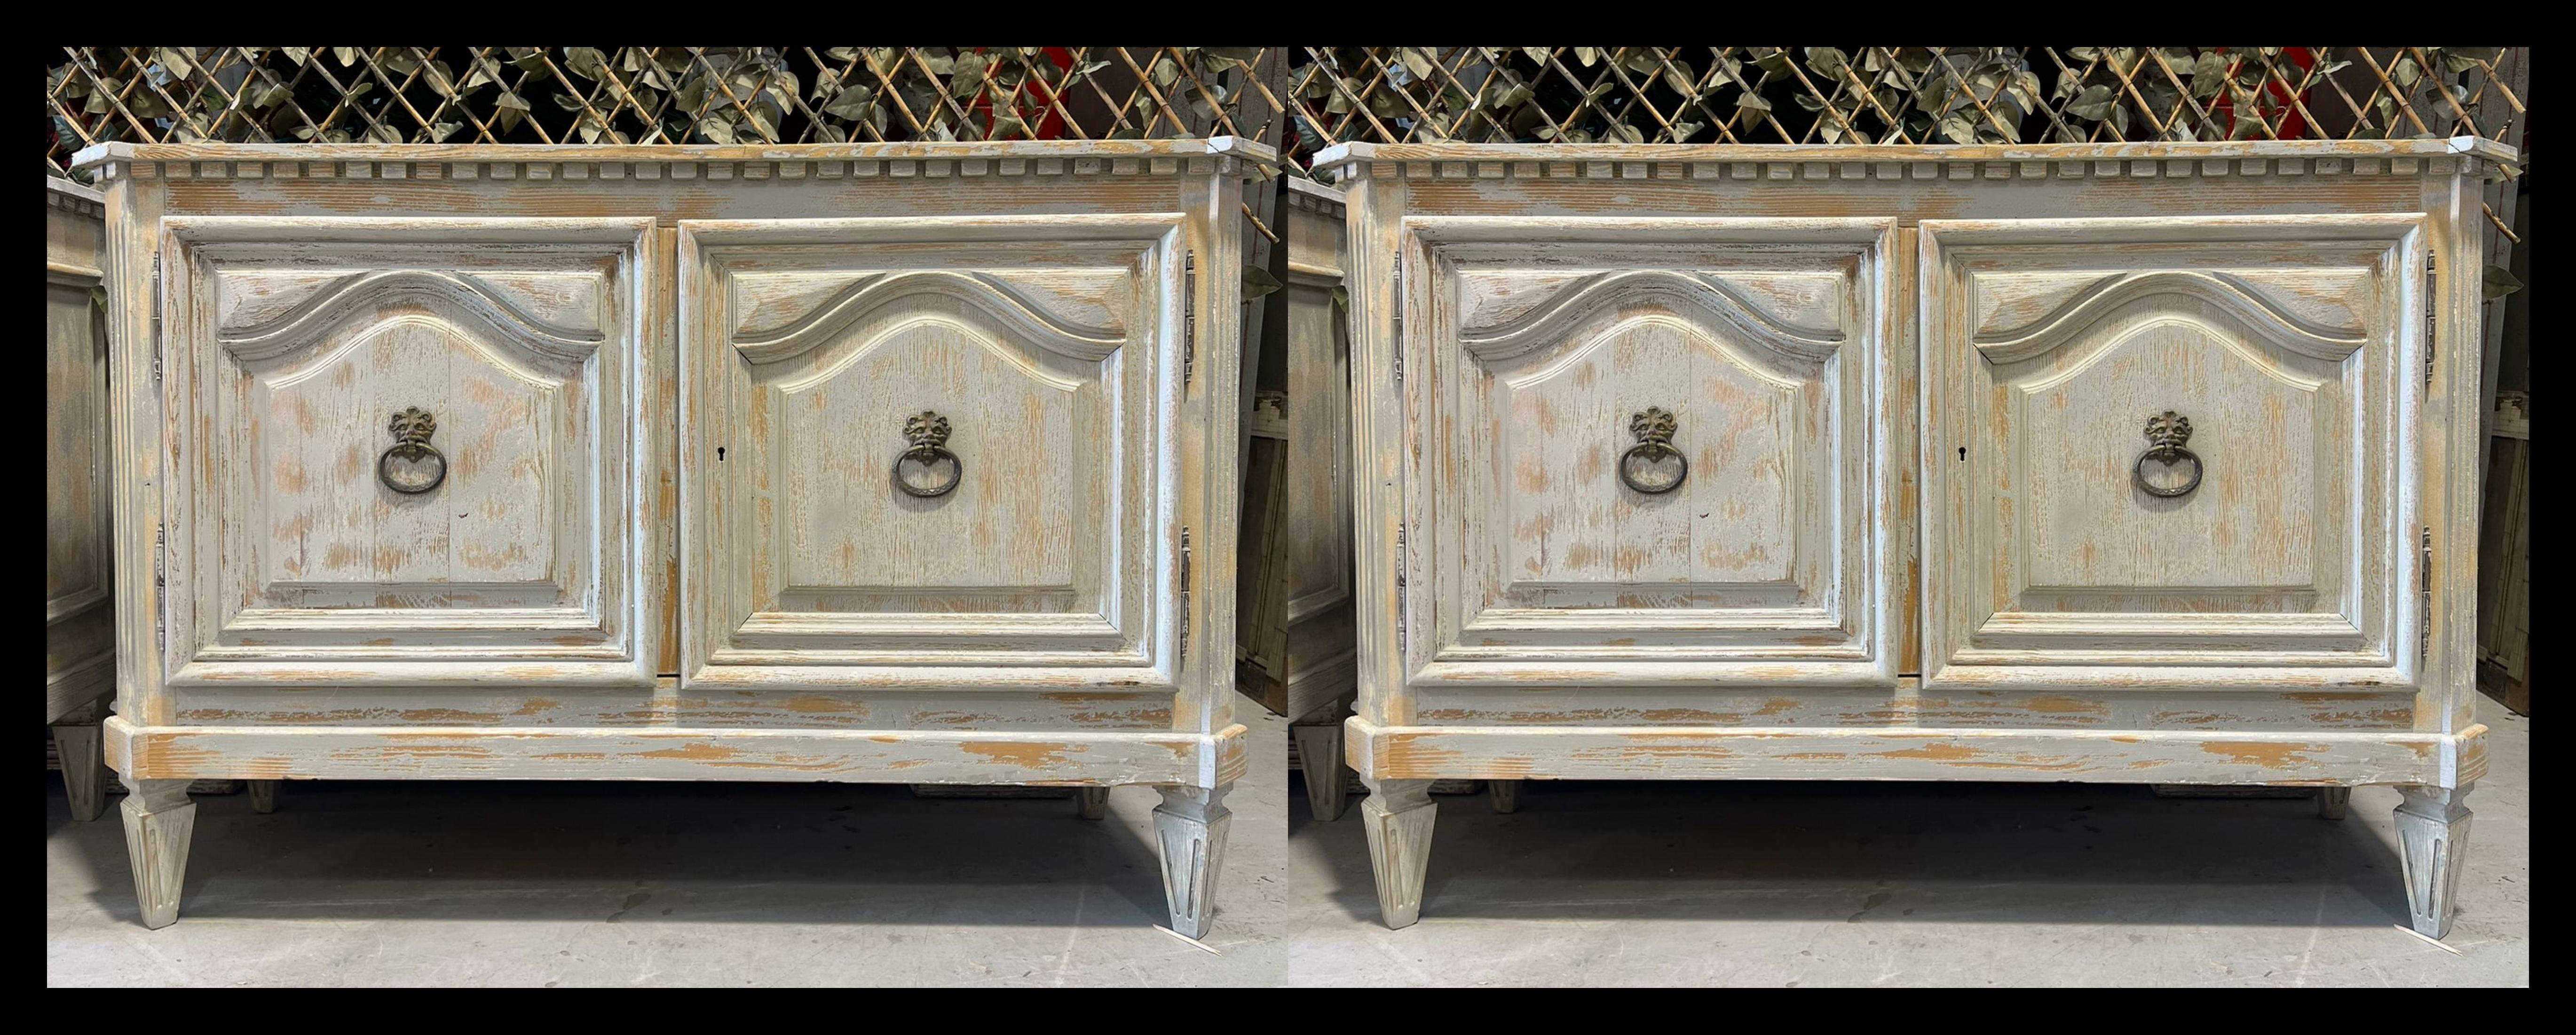 Beautiful Pair of Italian Chests of Drawers early 20th Century
Pine wood
perfectly preserved
Measurements with the upper floor:
144cm x 51cm x 2.5cm h: 97cm
